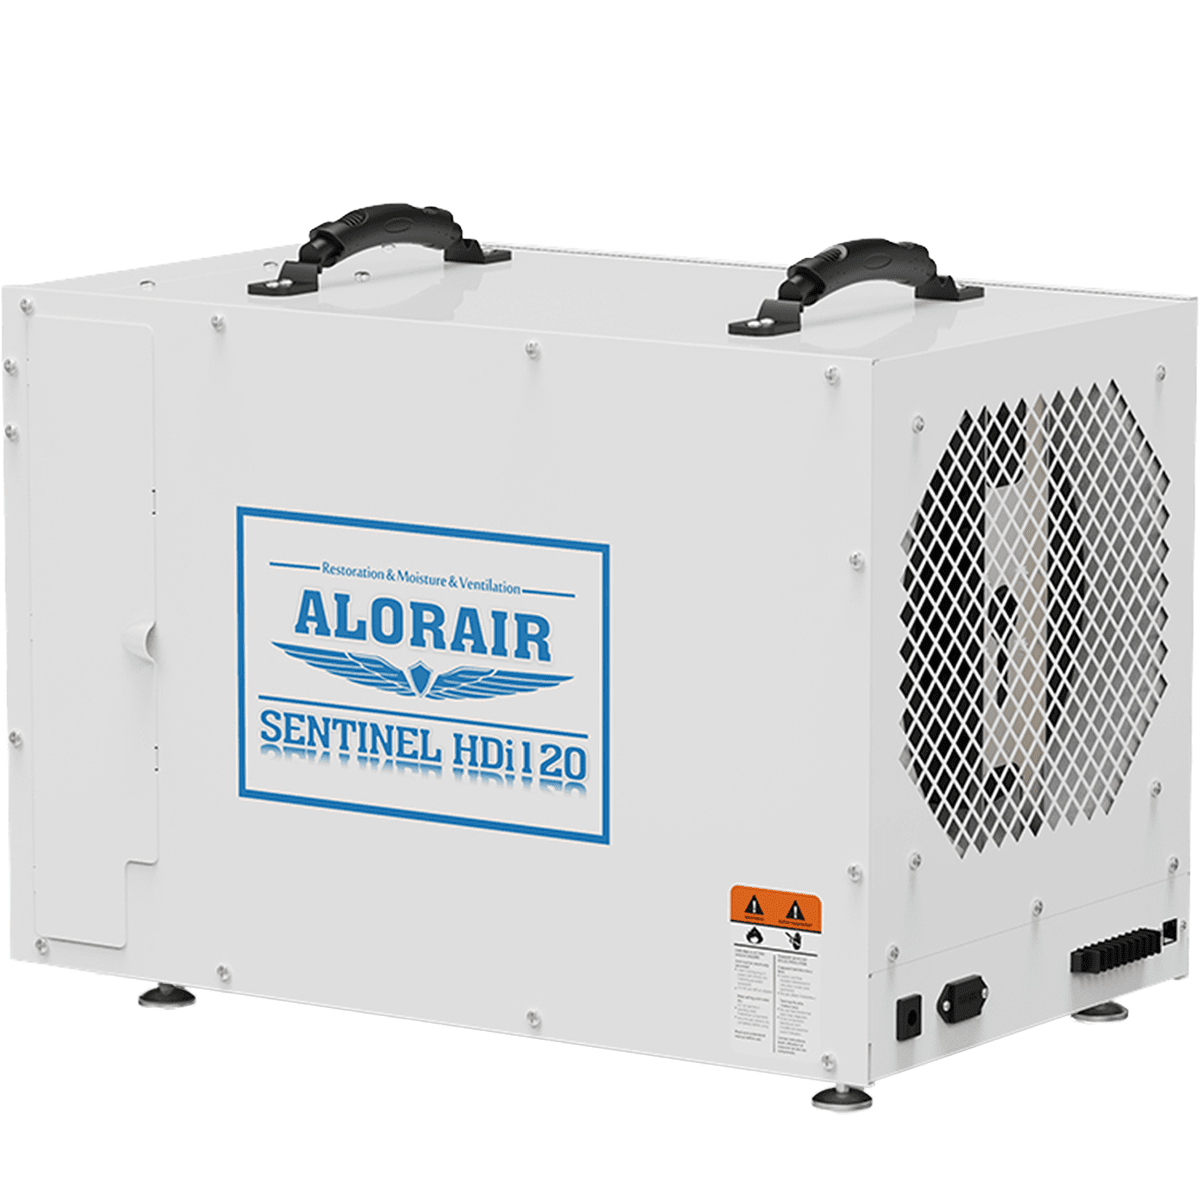 AlorAir Sentinel 120 Pint at AHAM Dehumidifier With Pump for Whole Home, Crawl Spaces, or Basements Up to 3,300 Sq. Ft.